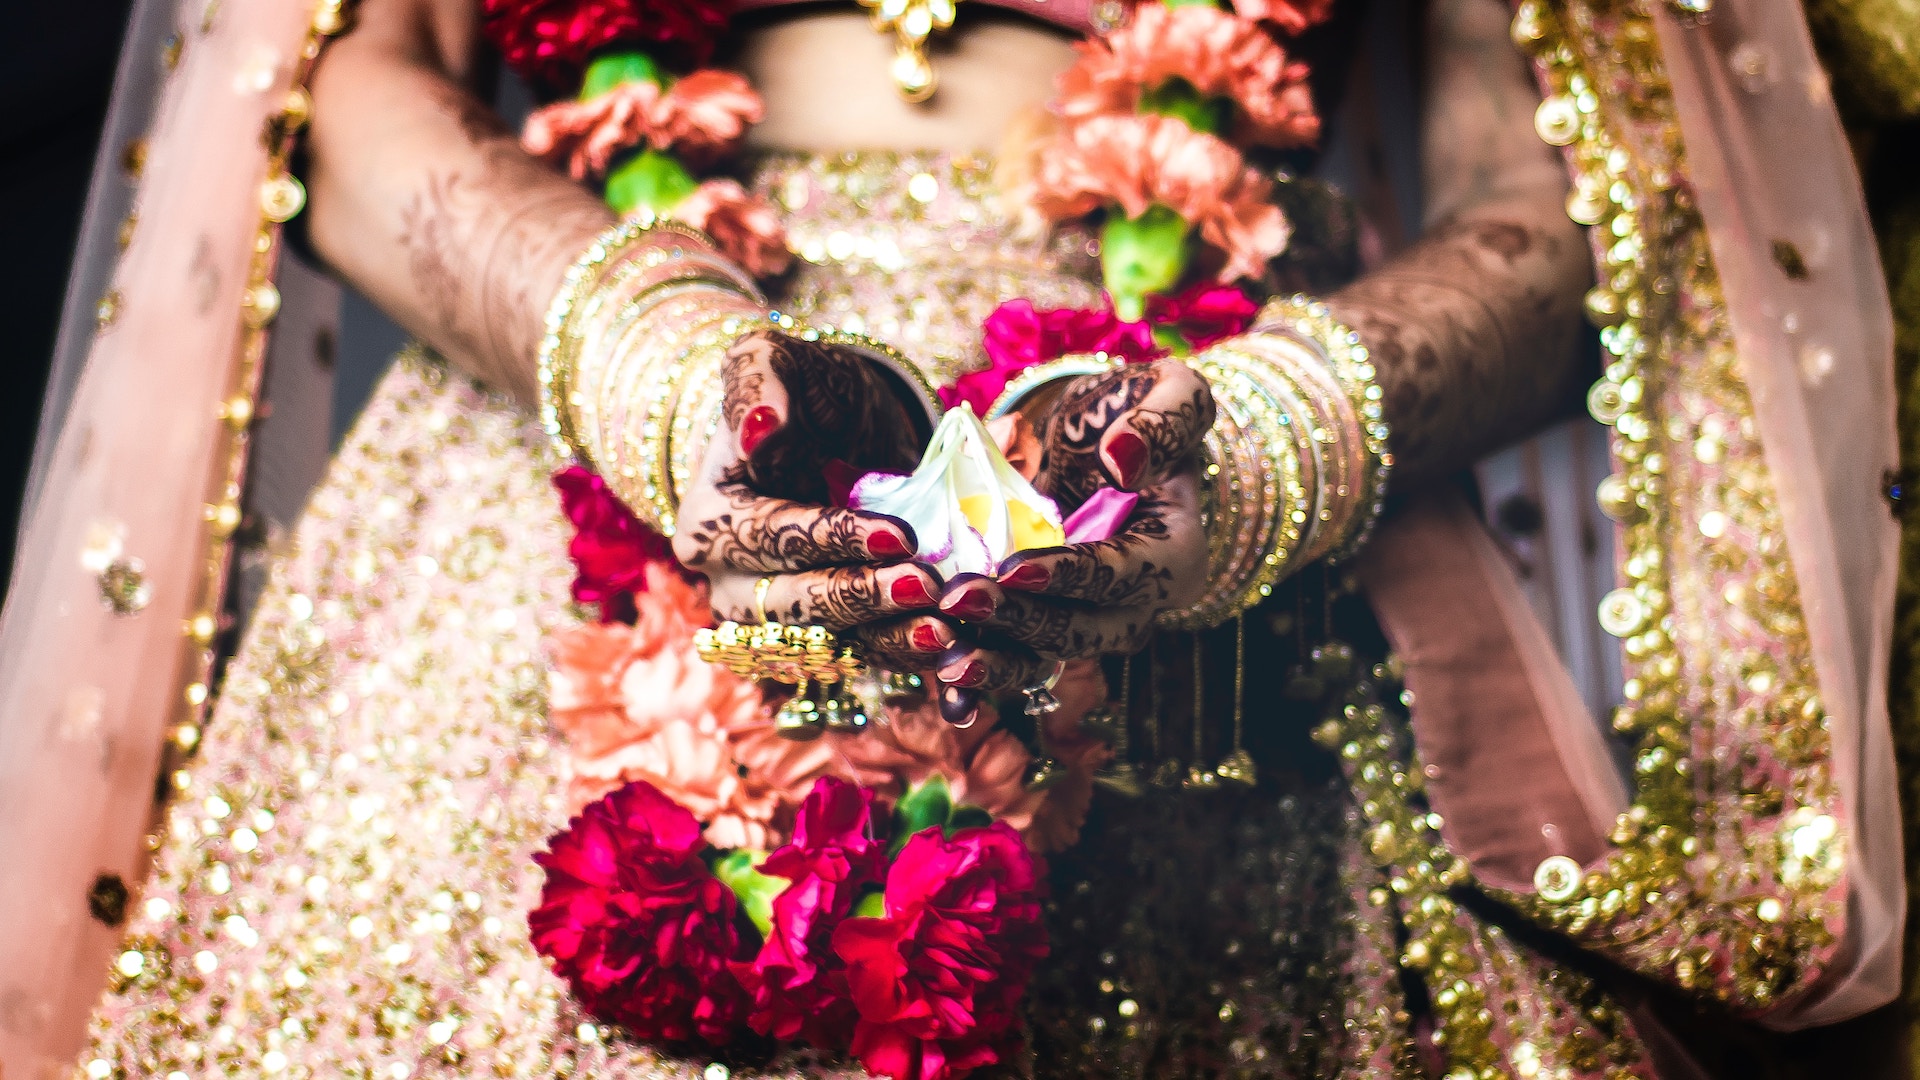 20 Mind-blowing Traditional Indian Wedding Rituals We Bet You Didn't Know